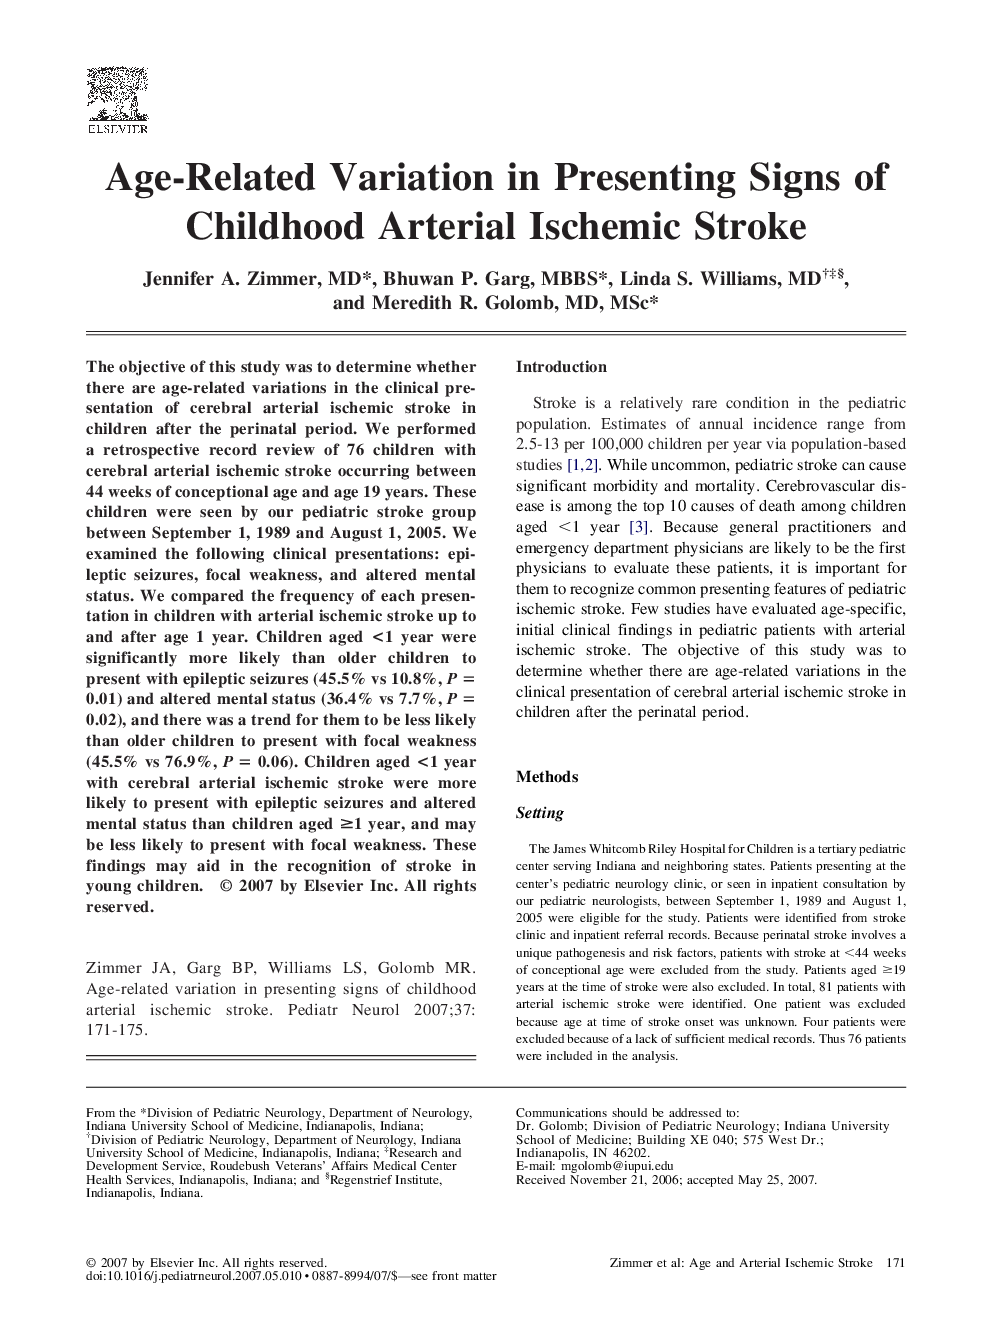 Age-Related Variation in Presenting Signs of Childhood Arterial Ischemic Stroke